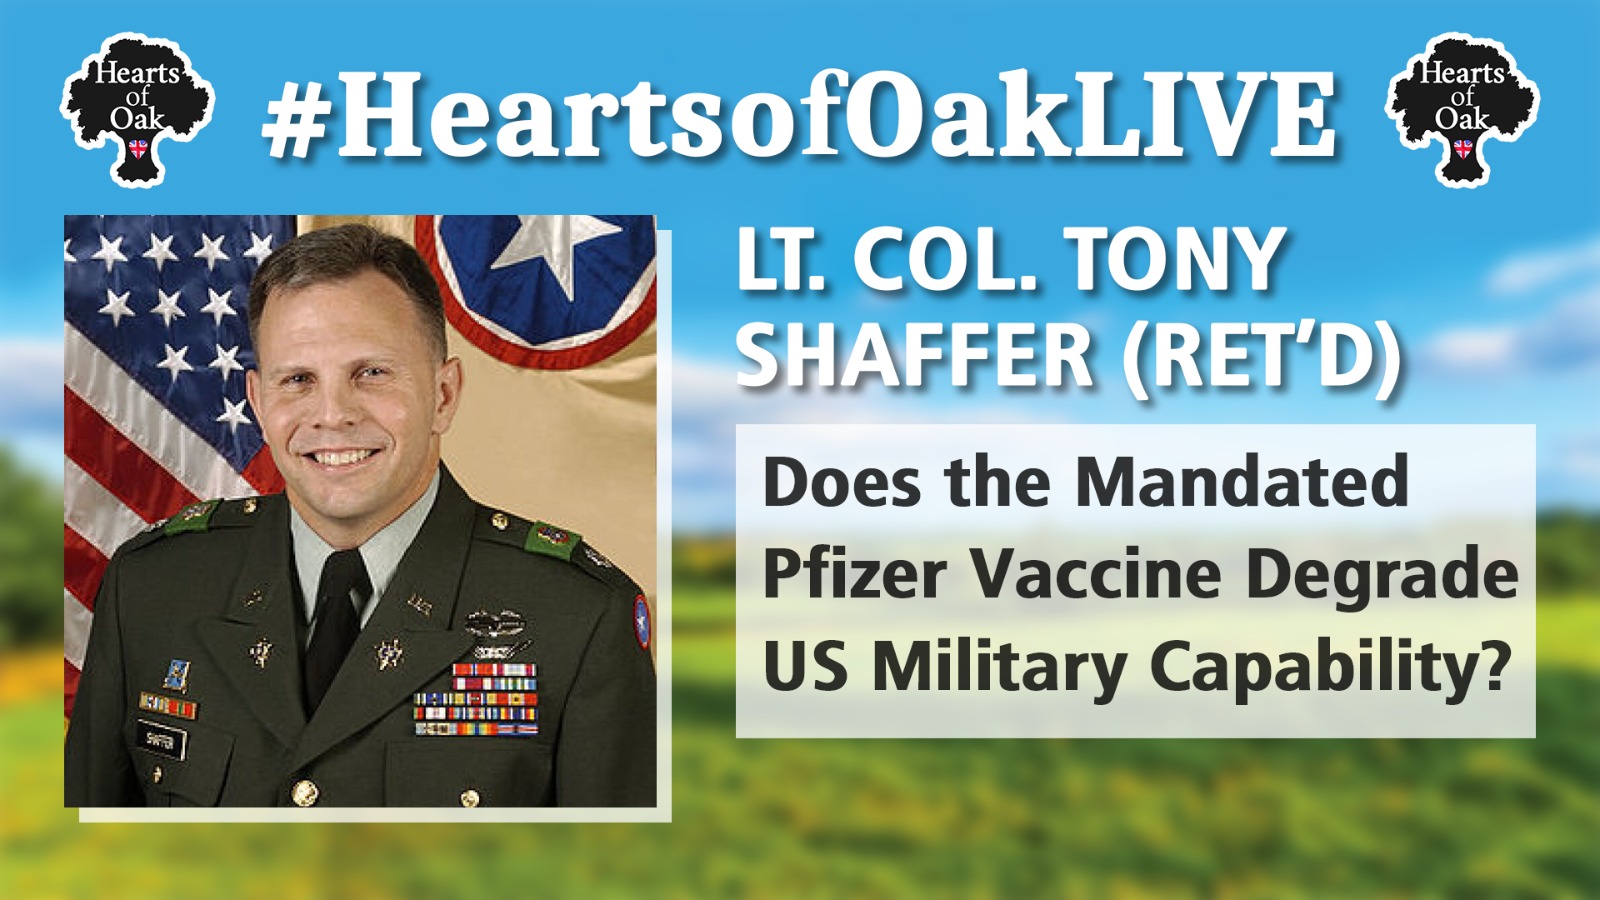 Lt. Col. Tony Shaffer (Ret'd): Does the Mandated Pfizer Vaccine Degrade US Military Capability?